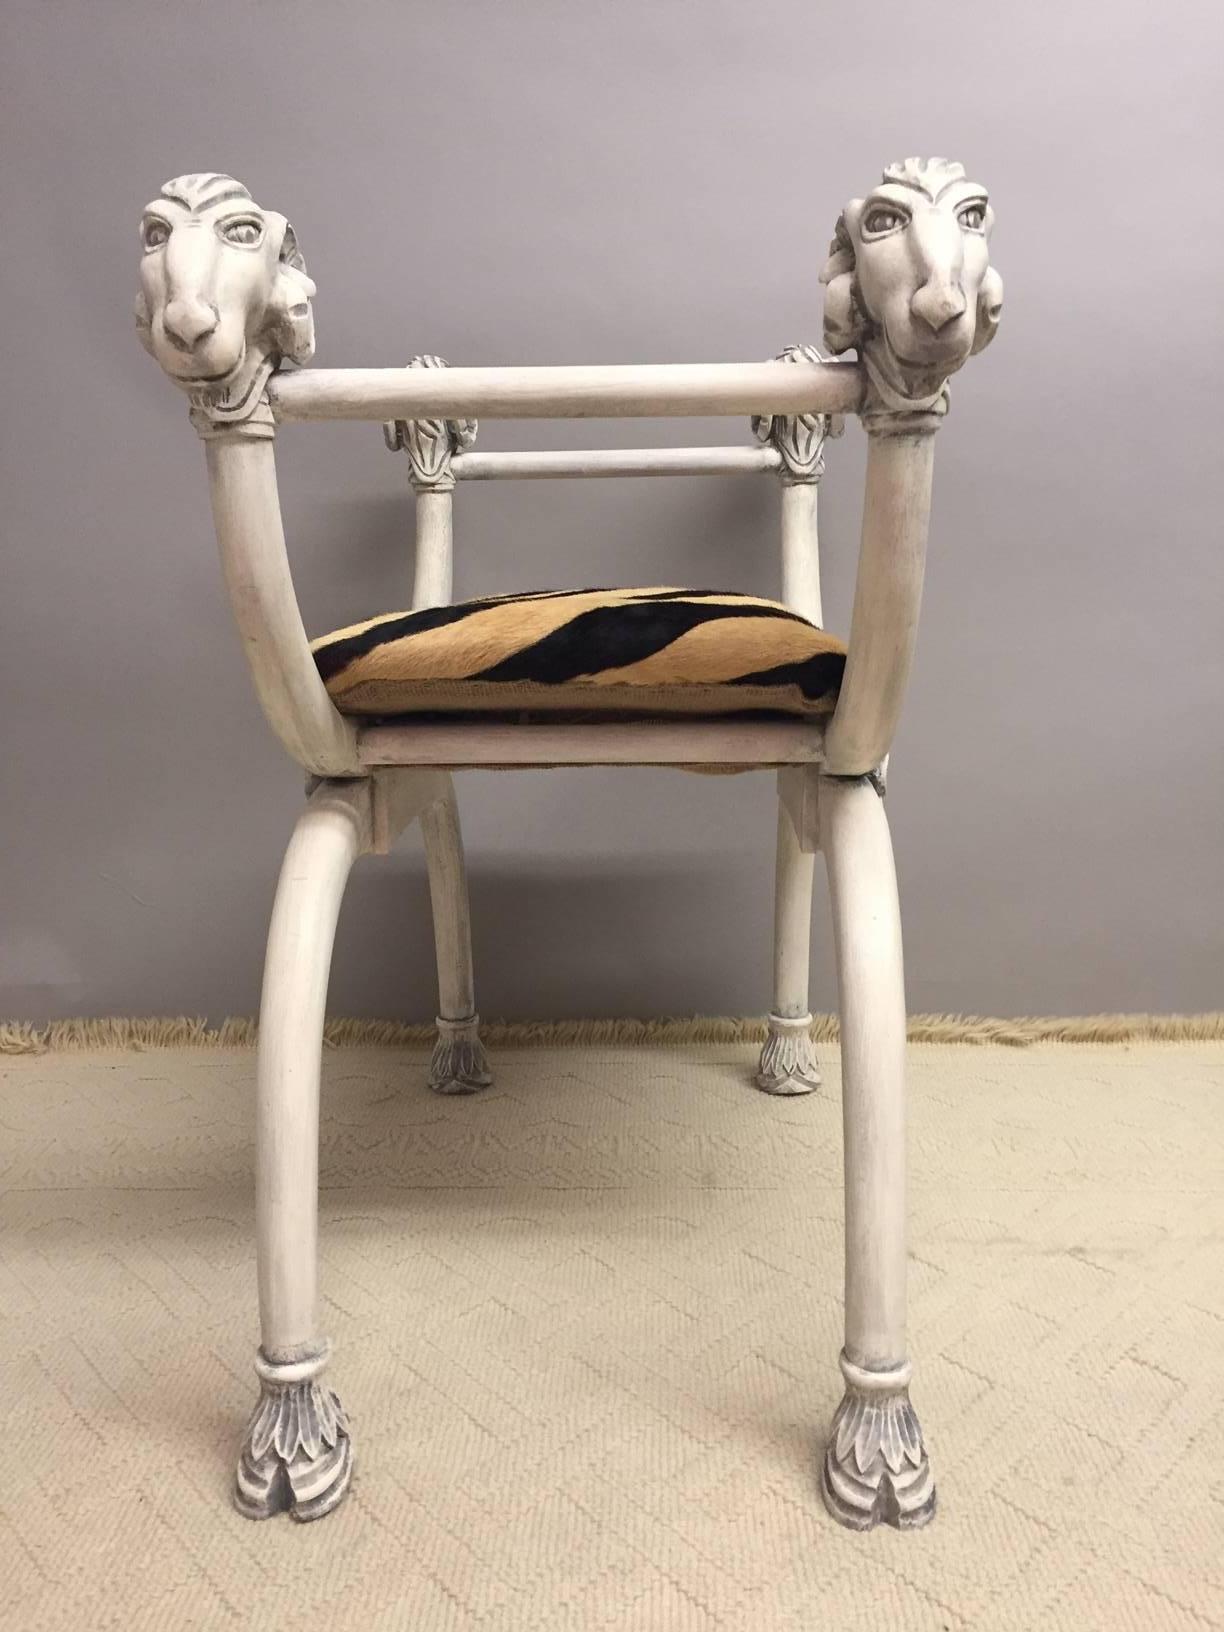 Italian Dramatic Pair of Ram's Head Benches with Printed Cowhide Zebra Motife Seats